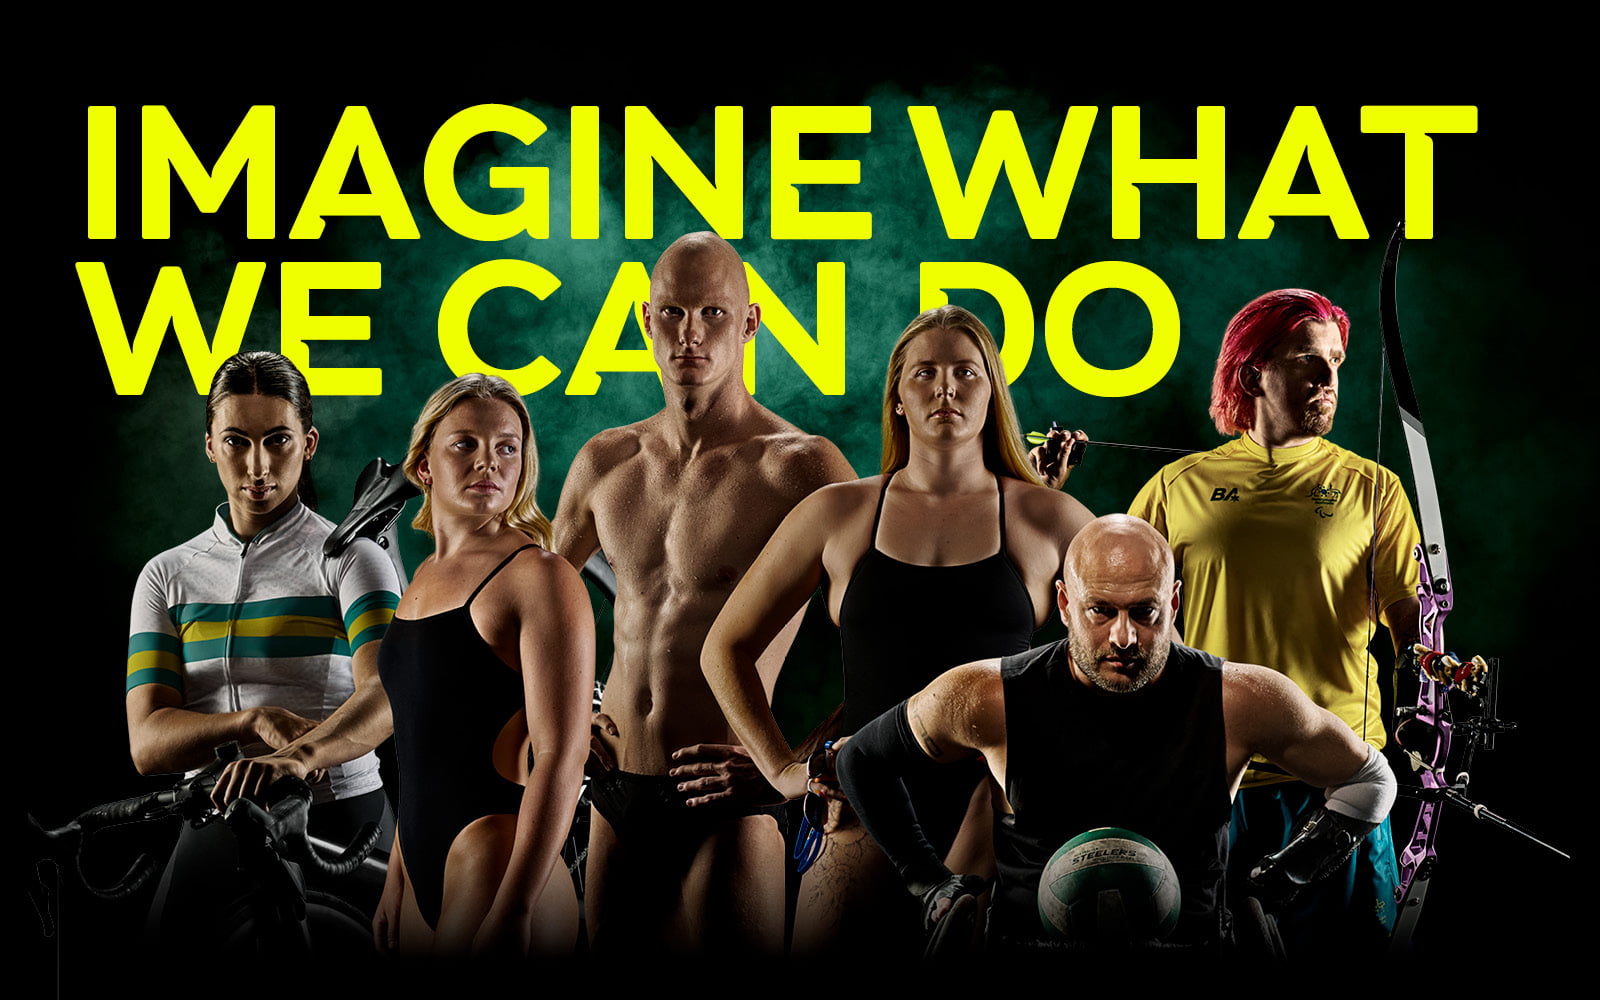 Paralympics Australia Launches Rallying Cry For Paris Campaign